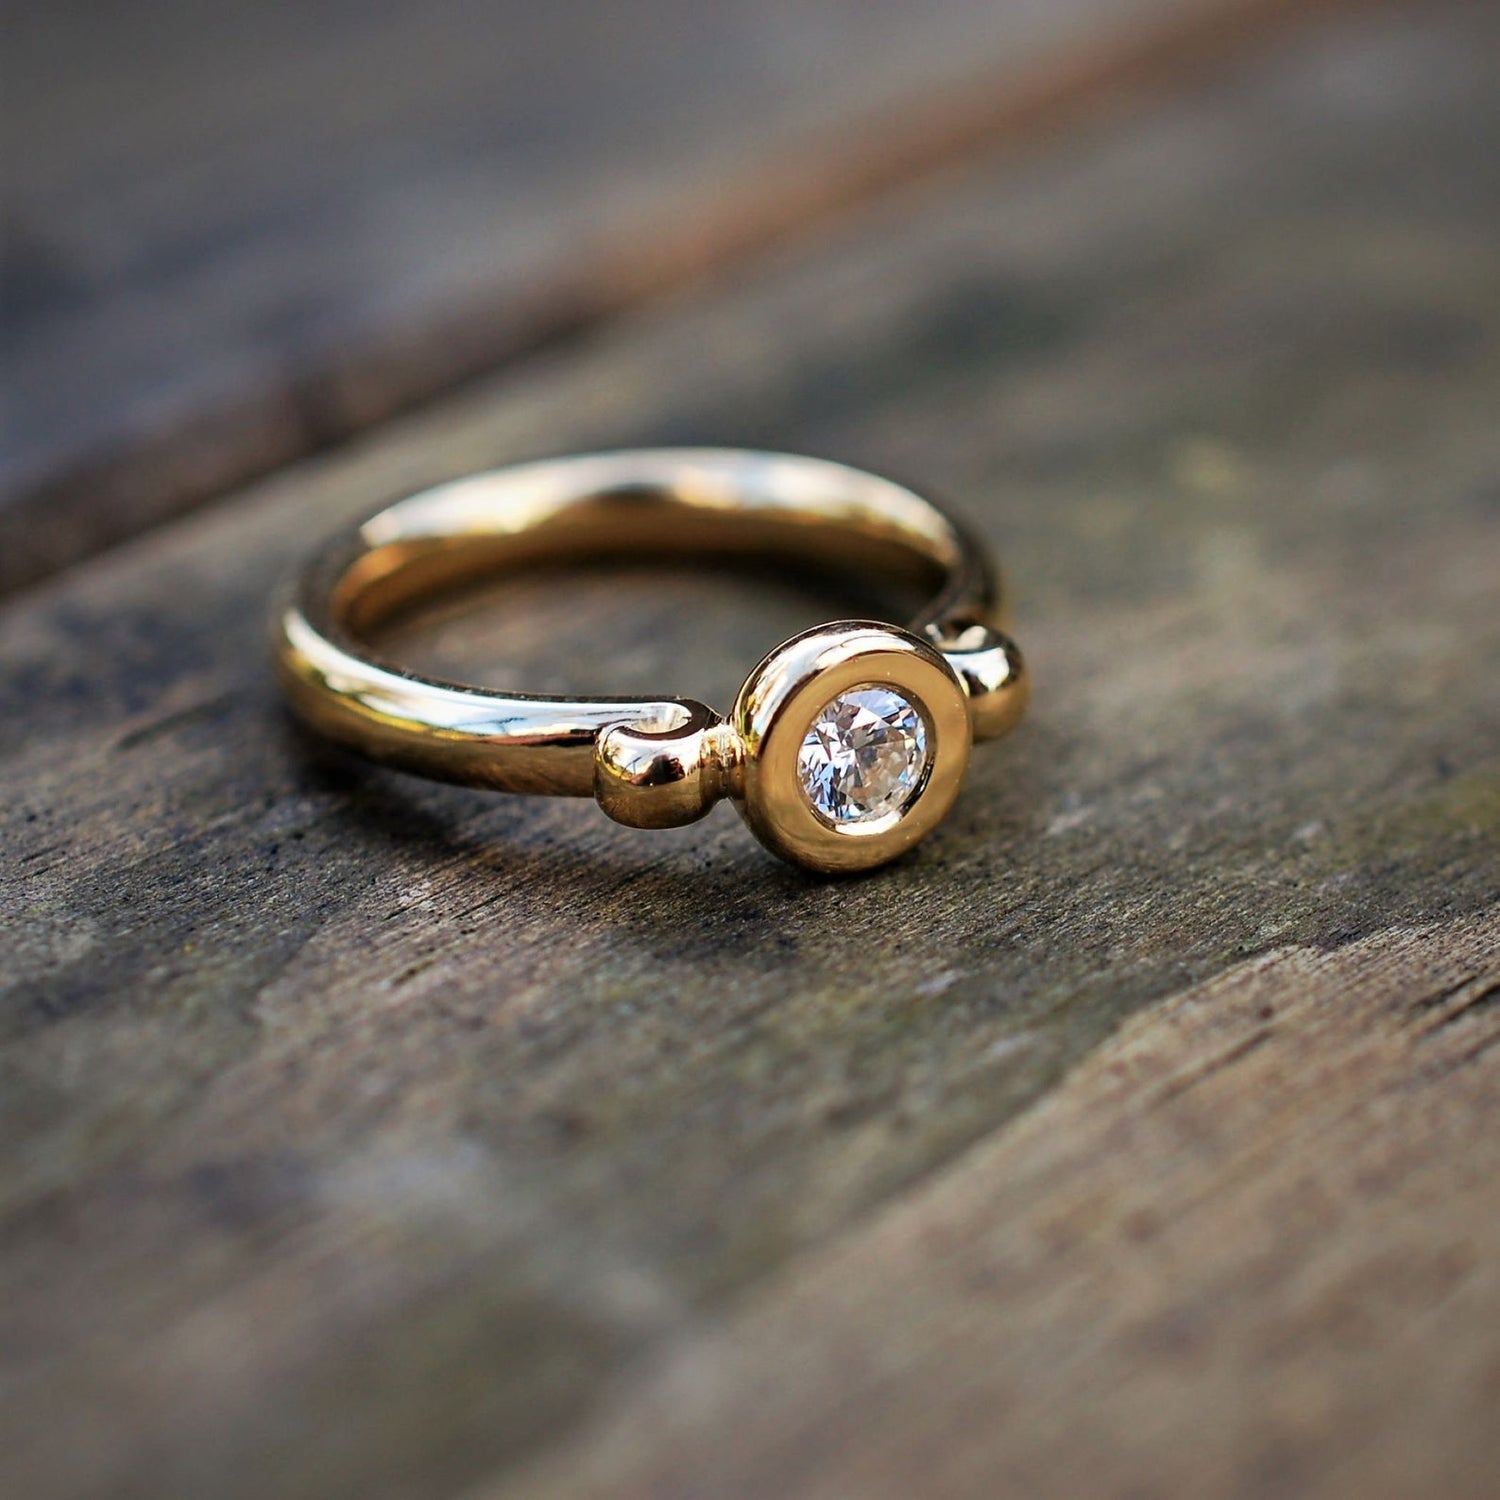 Fairtrade gold and cultured diamond engagement ring